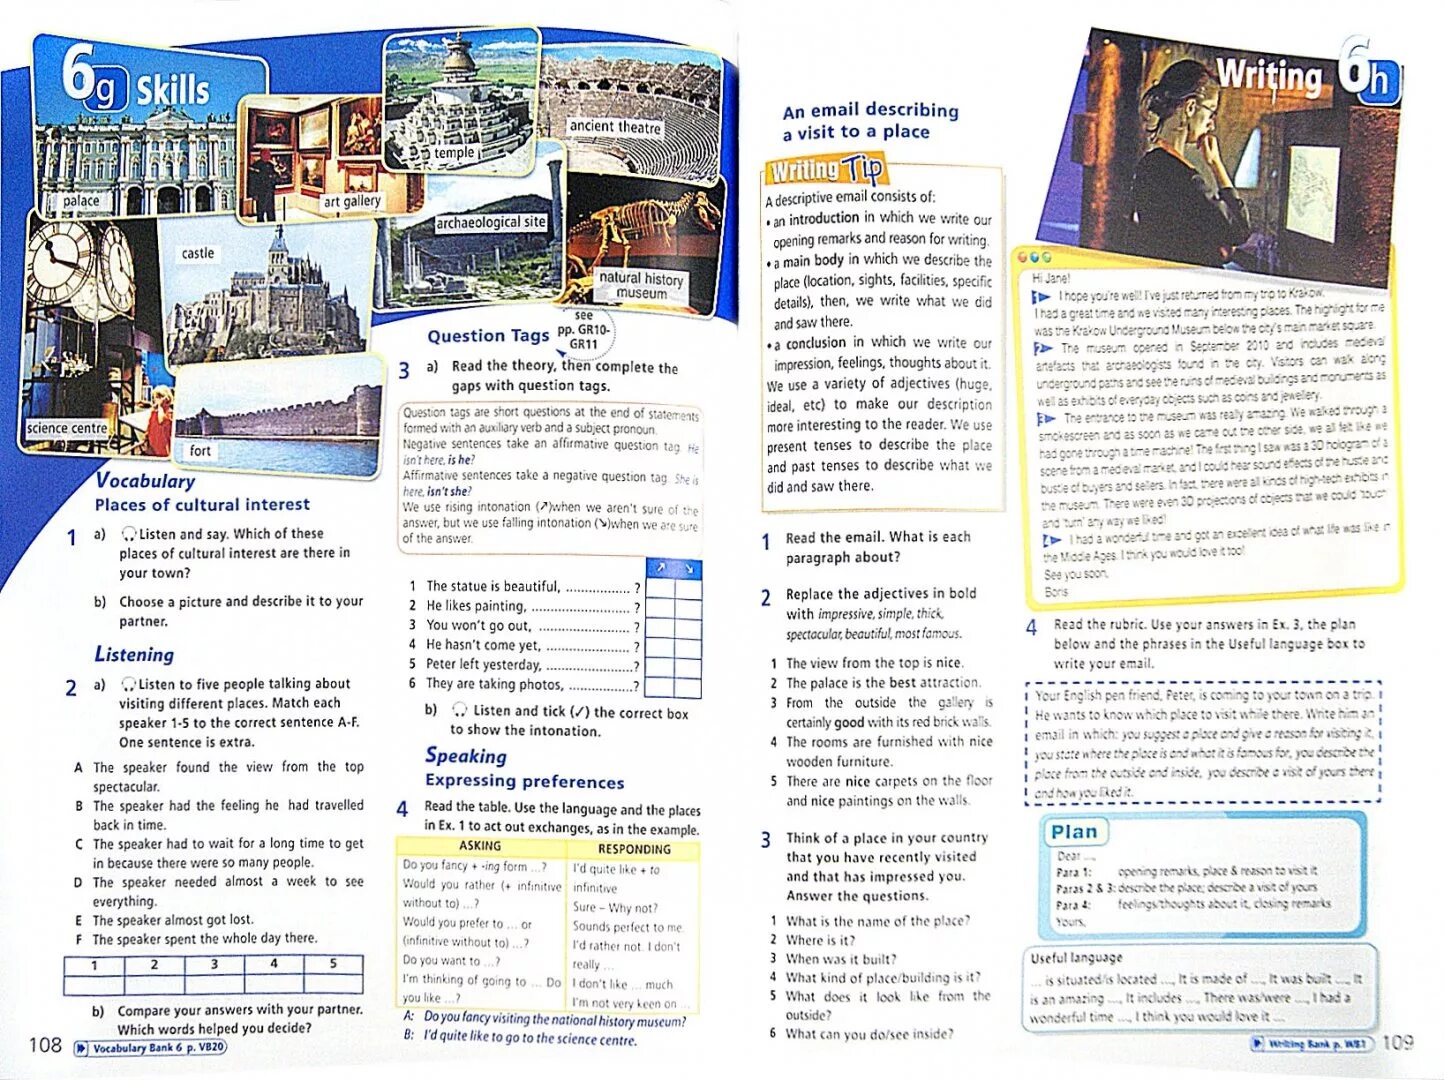 Describing a visit to a place. An email describing a visit to a place. Баранова Дули Копылова 6 класс учебник. Spotlight 9 модуль 6e. An email describing a visit to a place. Английский язык 6 класс мильруд дули